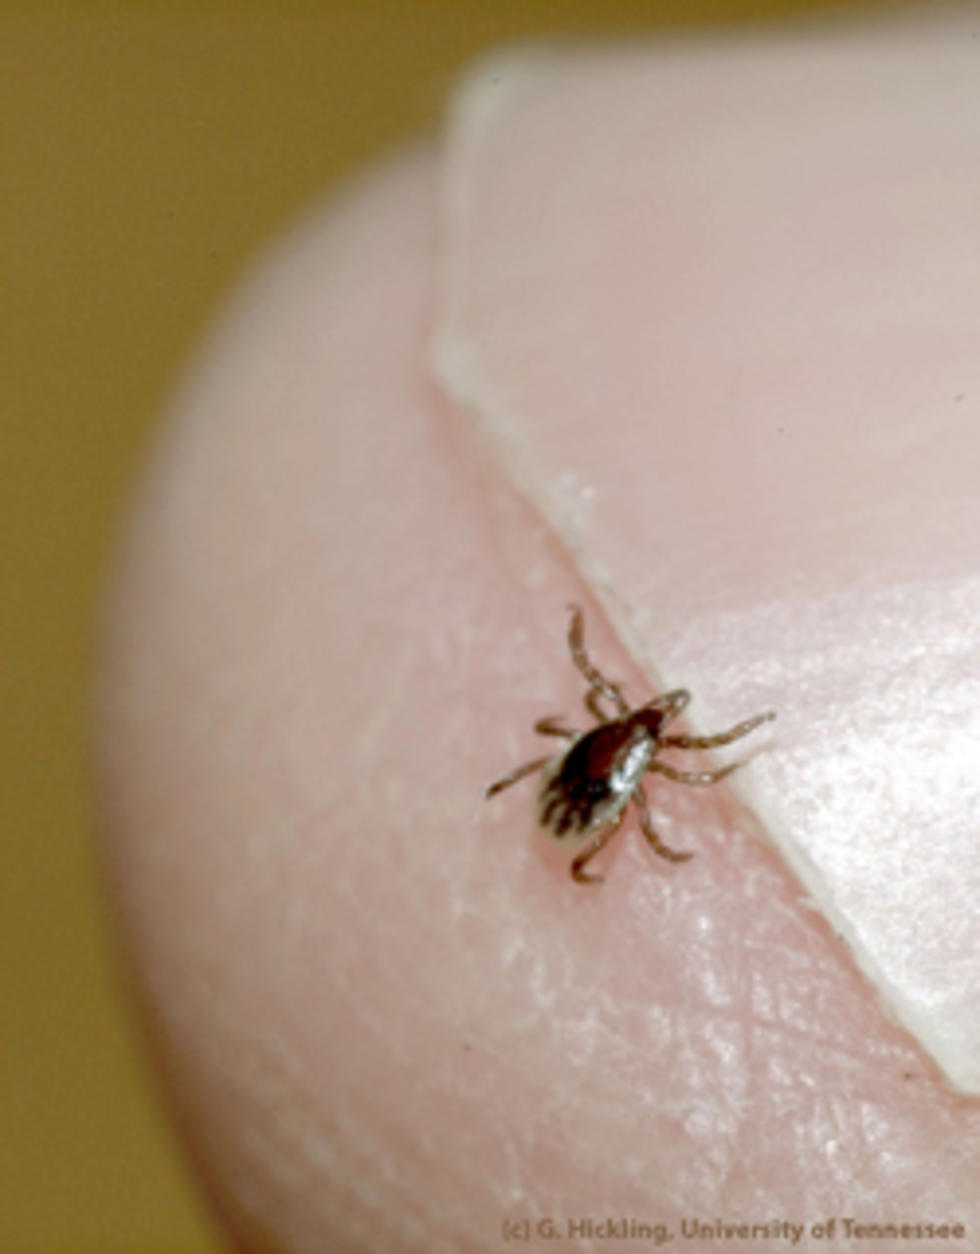 New Sometimes Fatal Tick Disease Confirmed In New York State